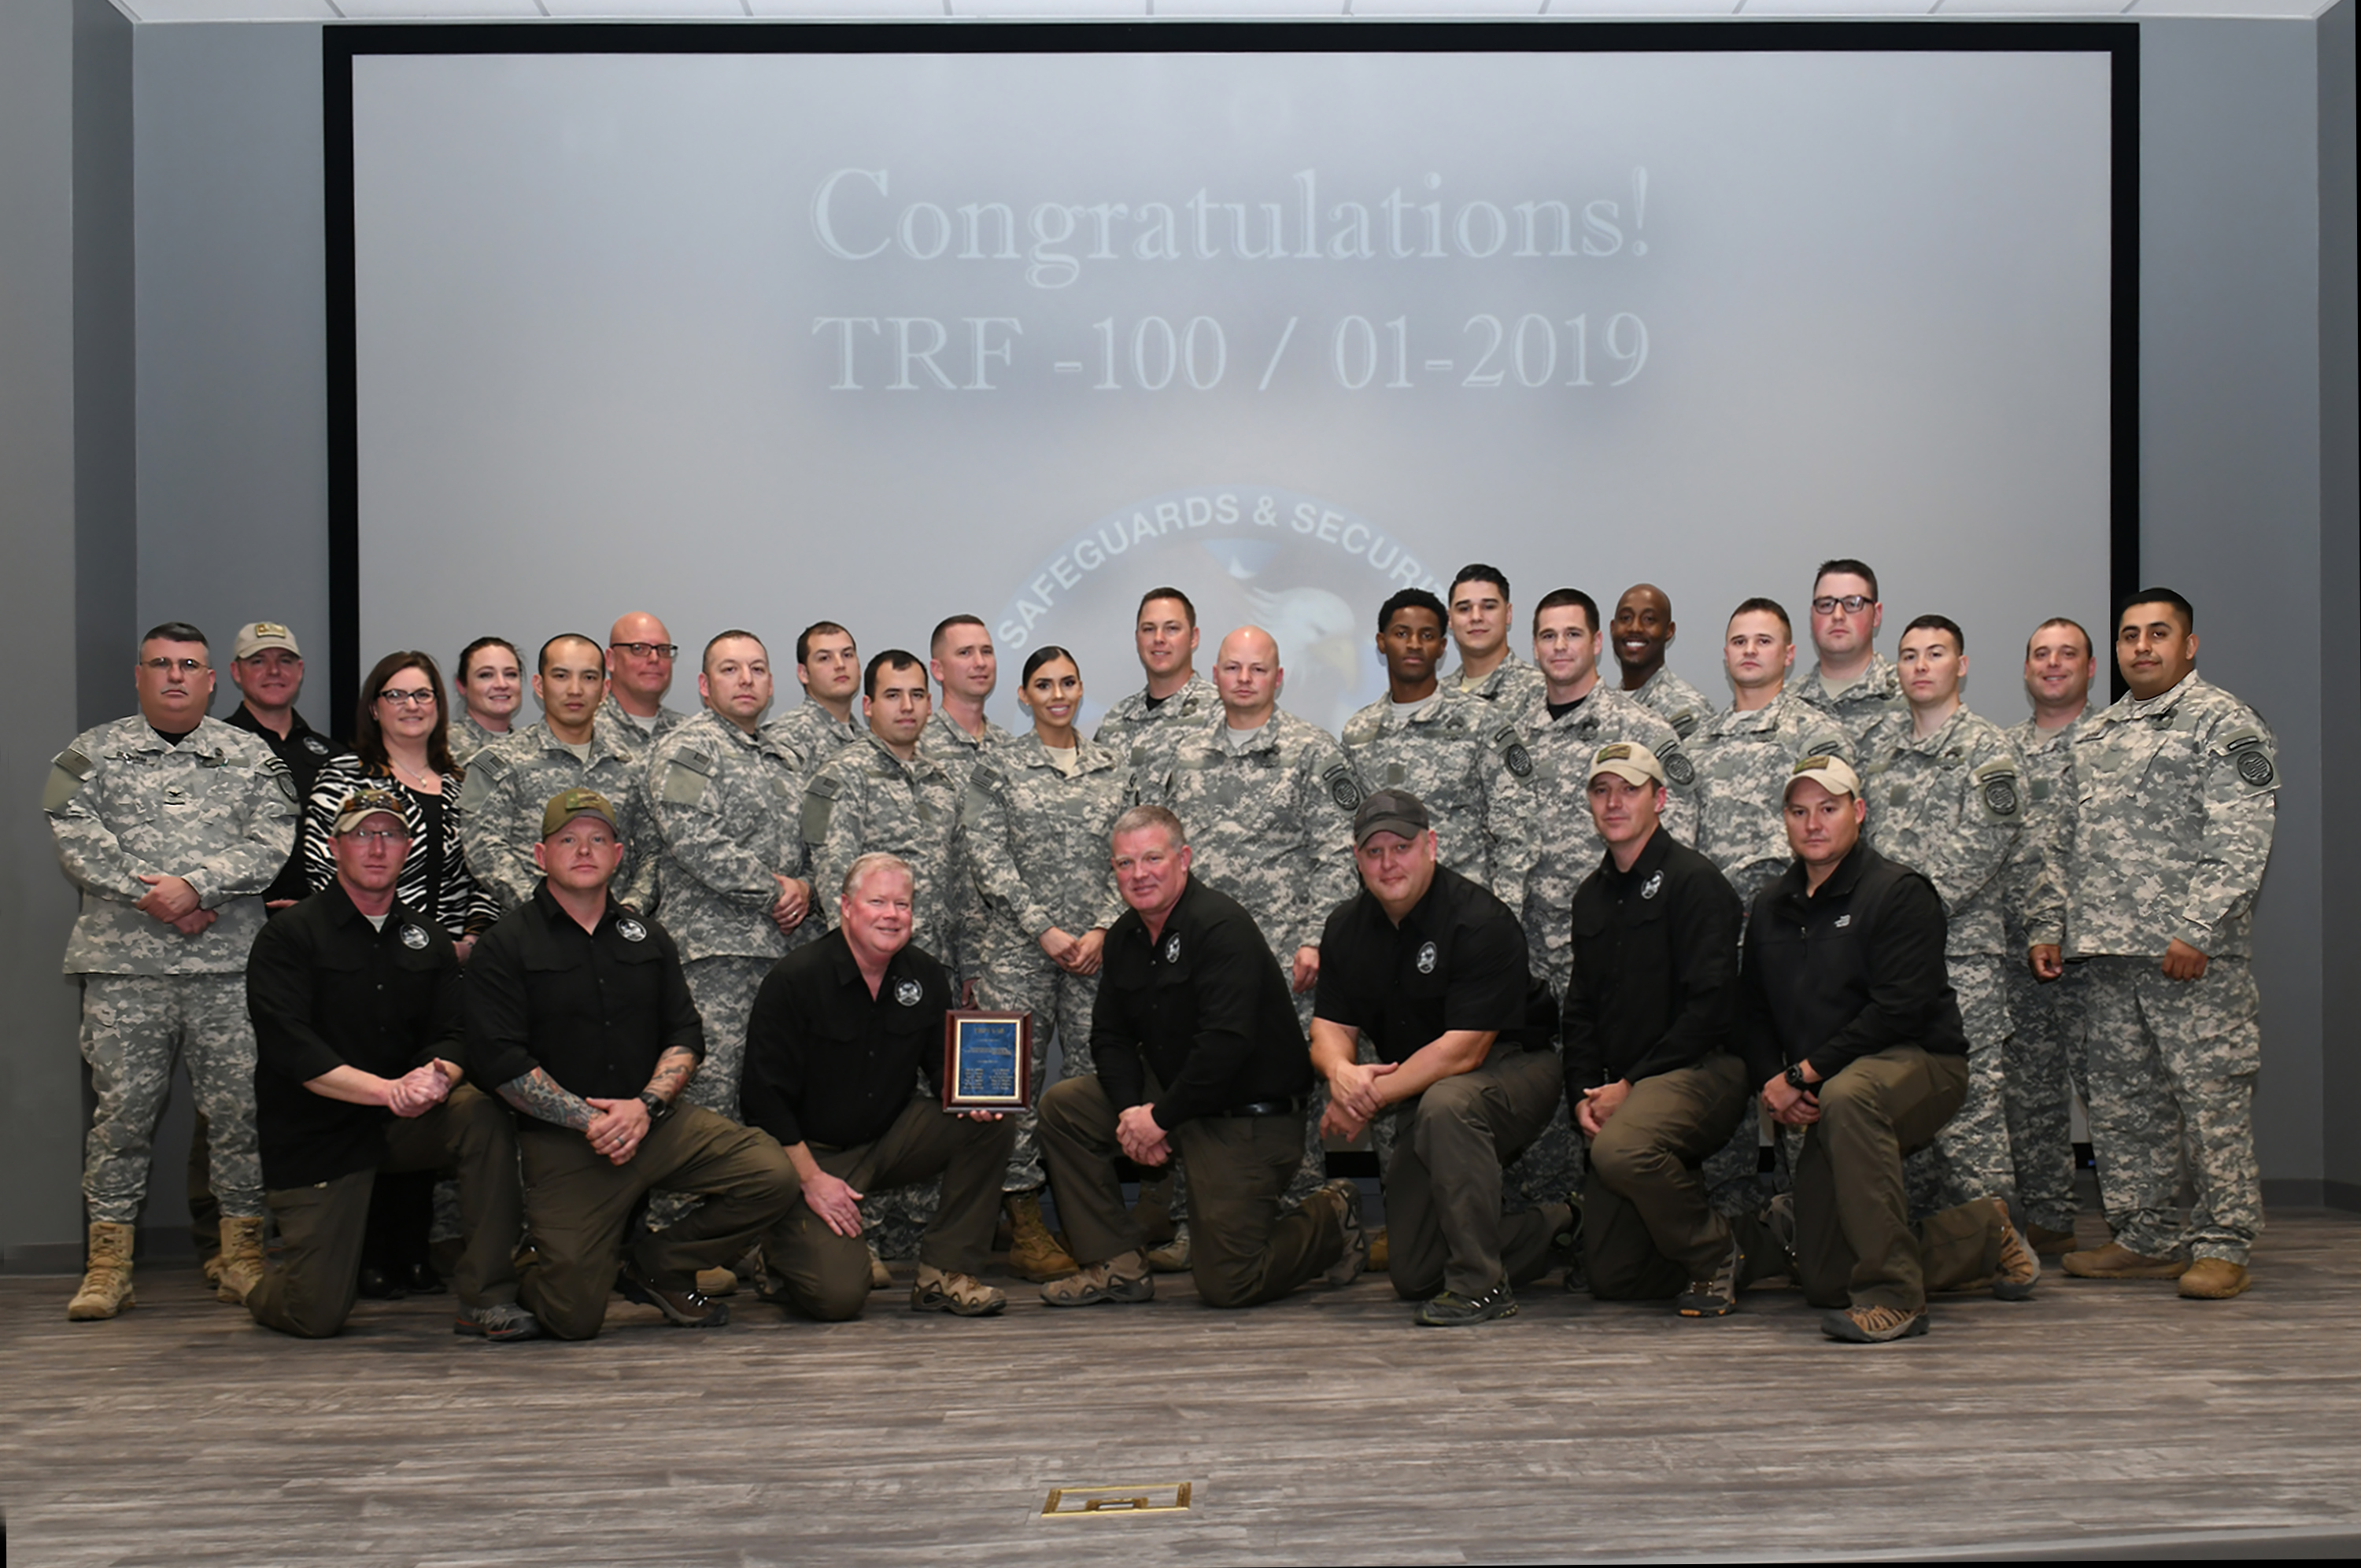 Graduates of Department of Energy National Training Center’s Tactical Response Force I 